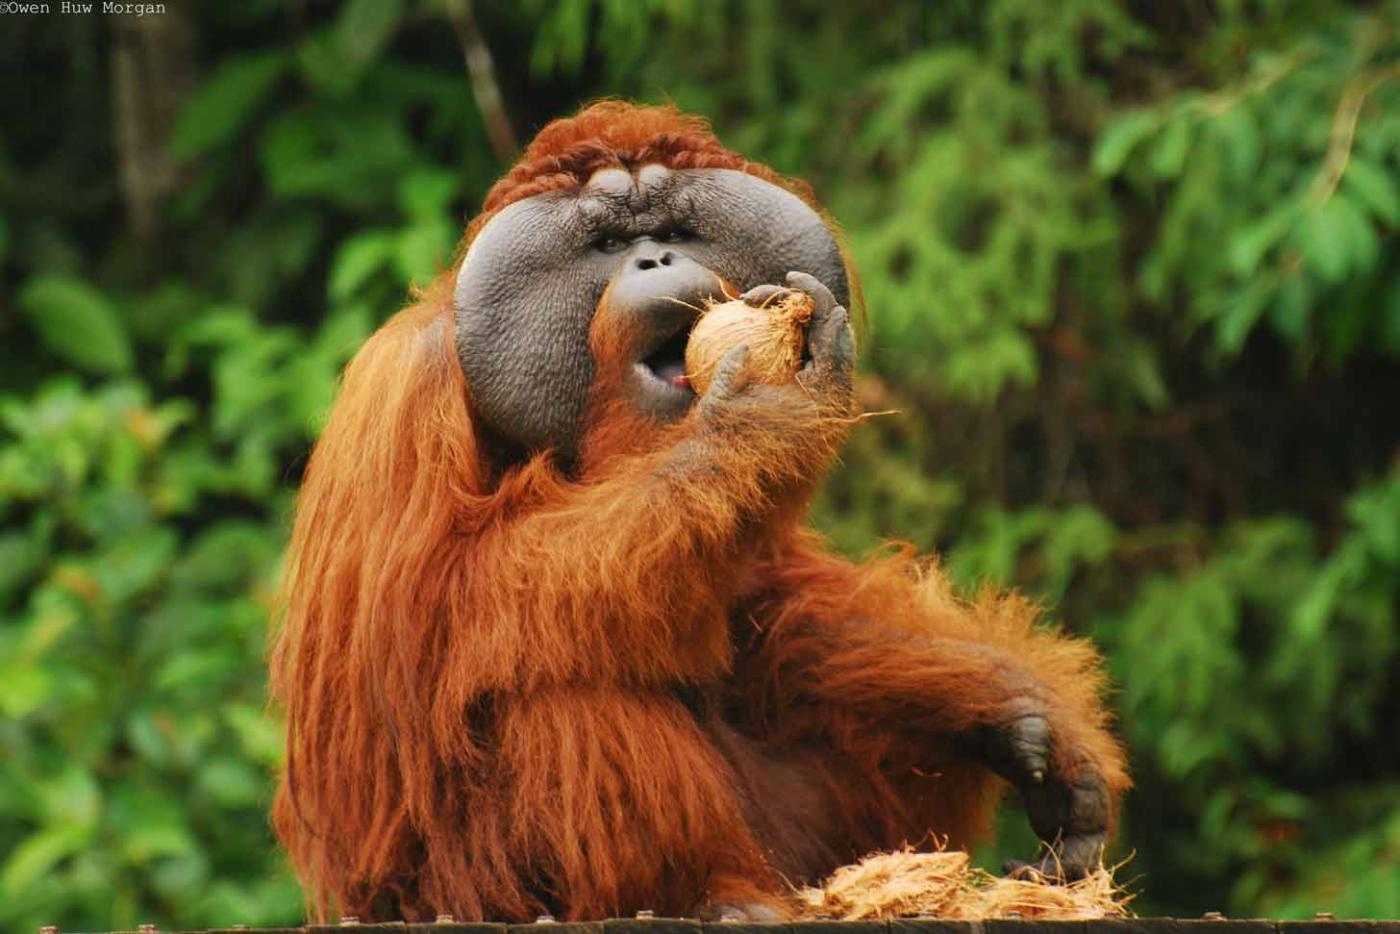 Join the Great Orangutan Project for the absolute adventure of a lifetime!